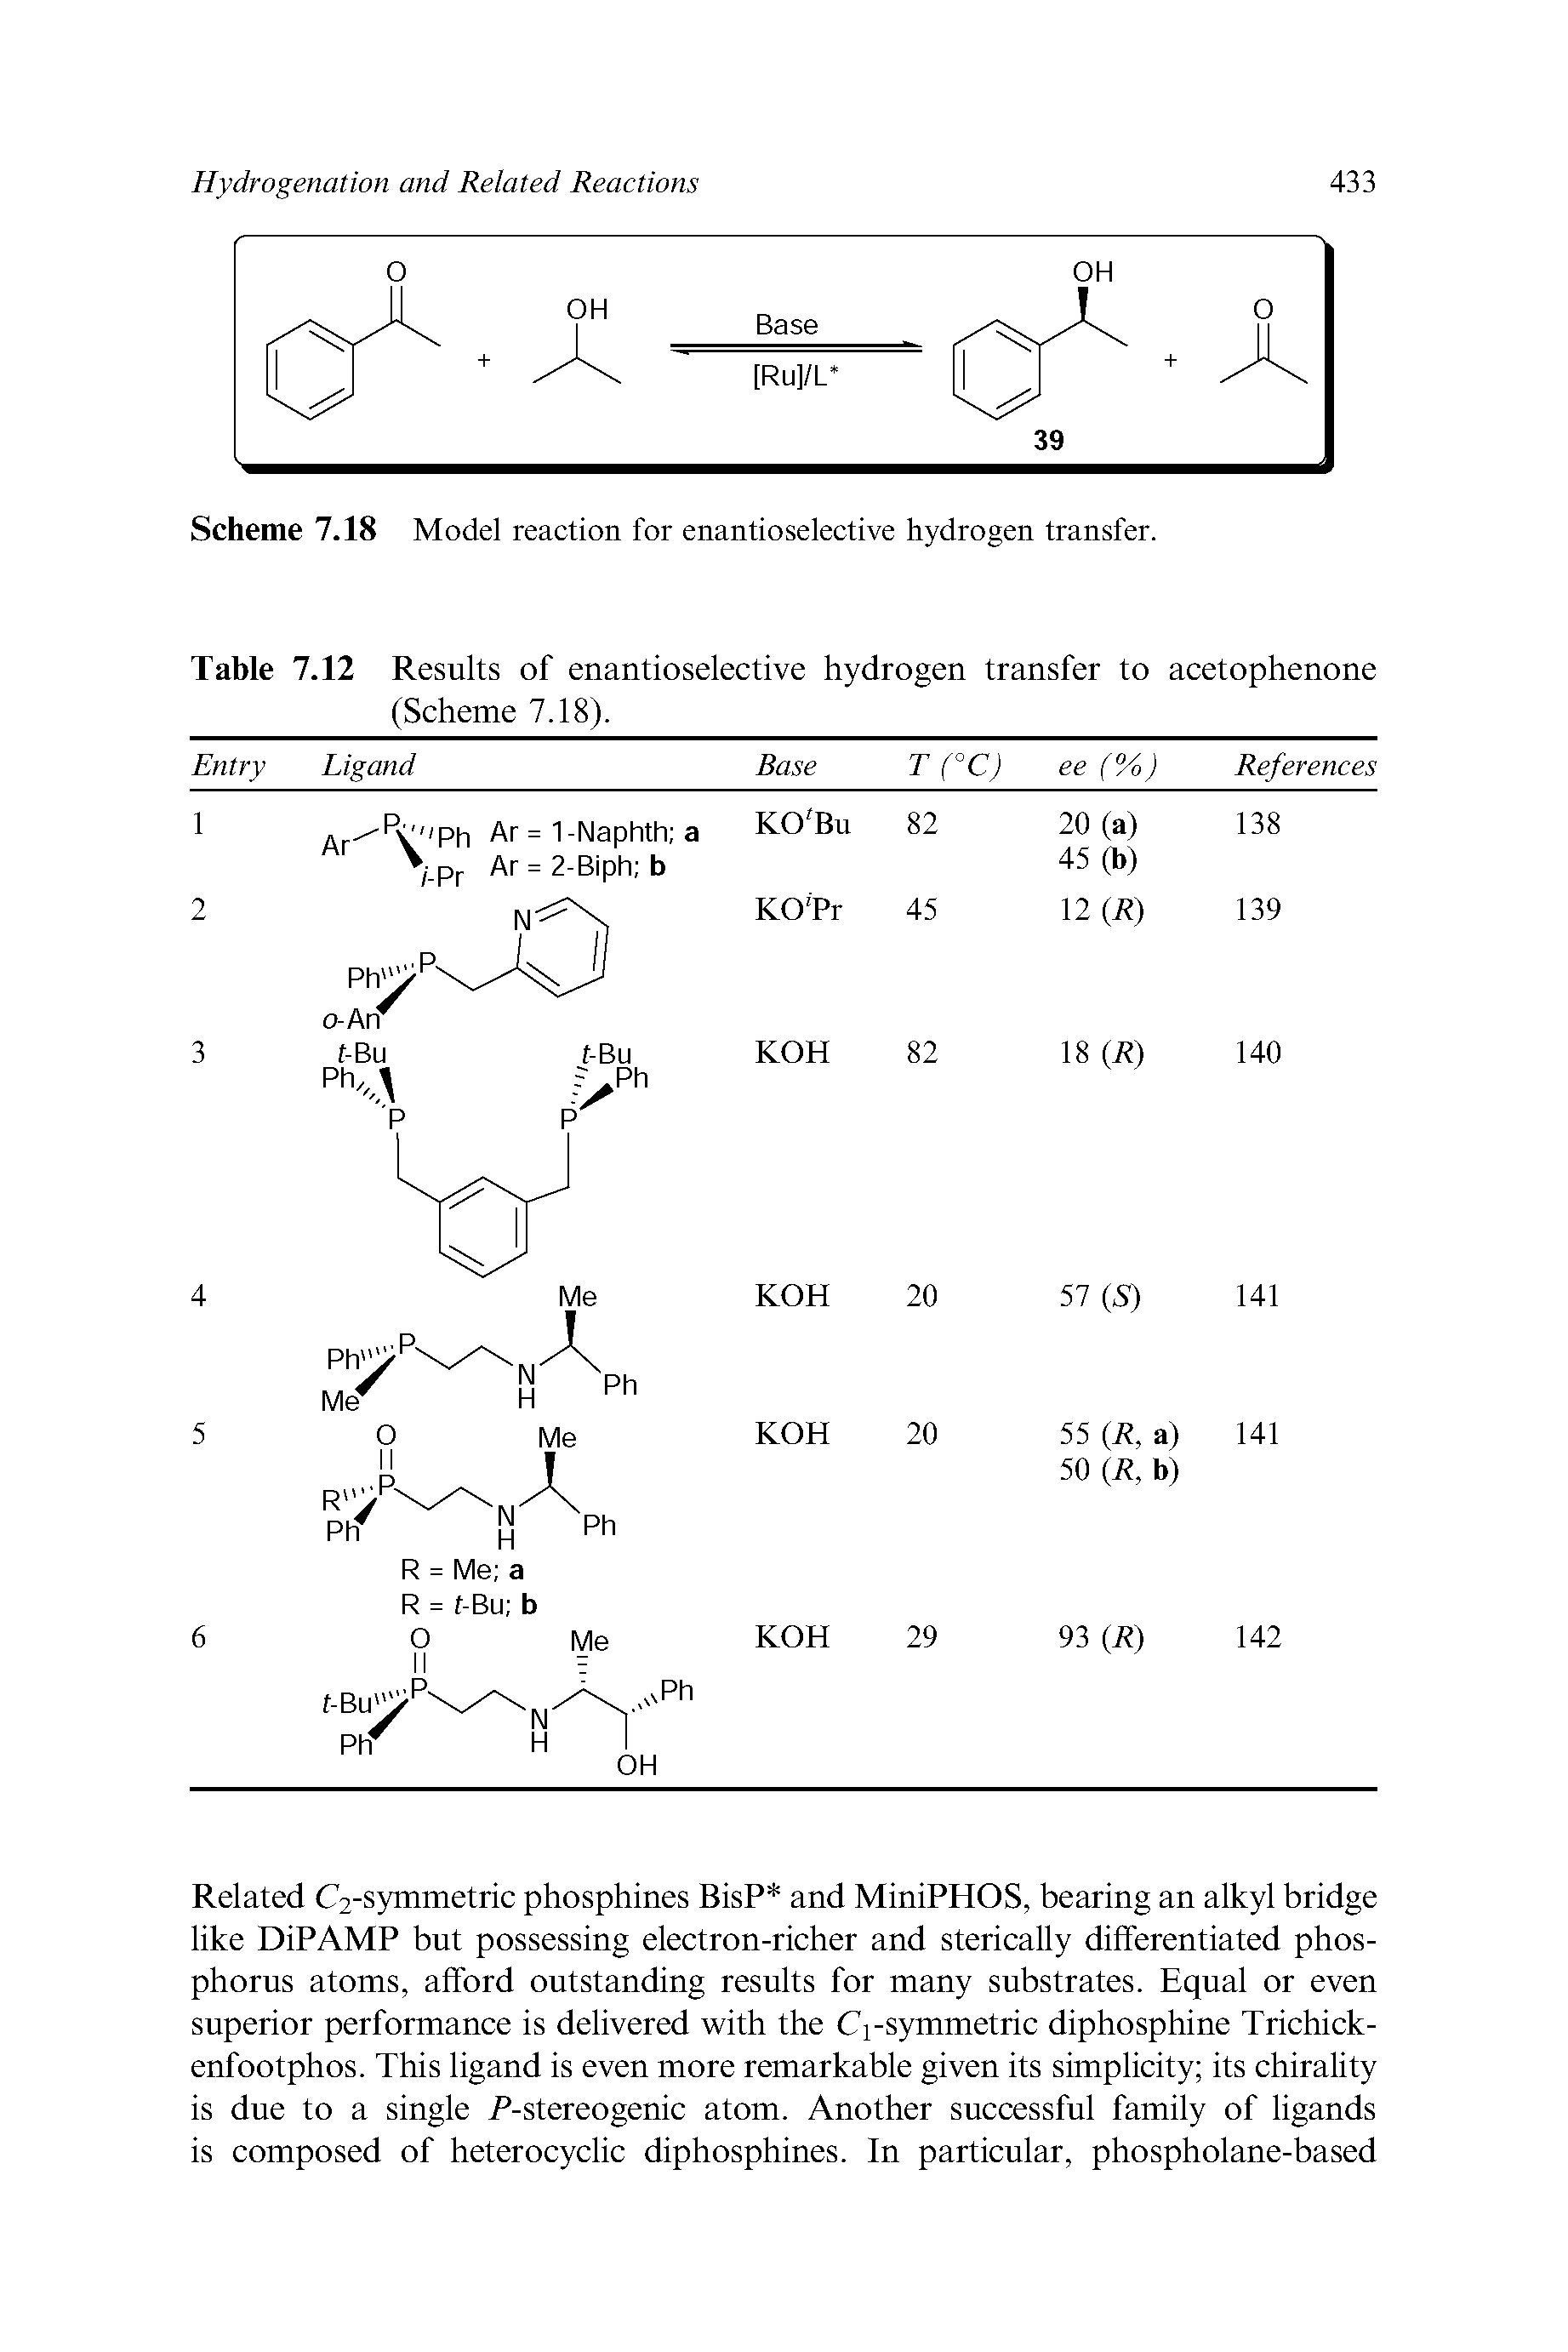 Table 7.12 Results of enantioselective hydrogen transfer to acetophenone (Scheme 7.18).